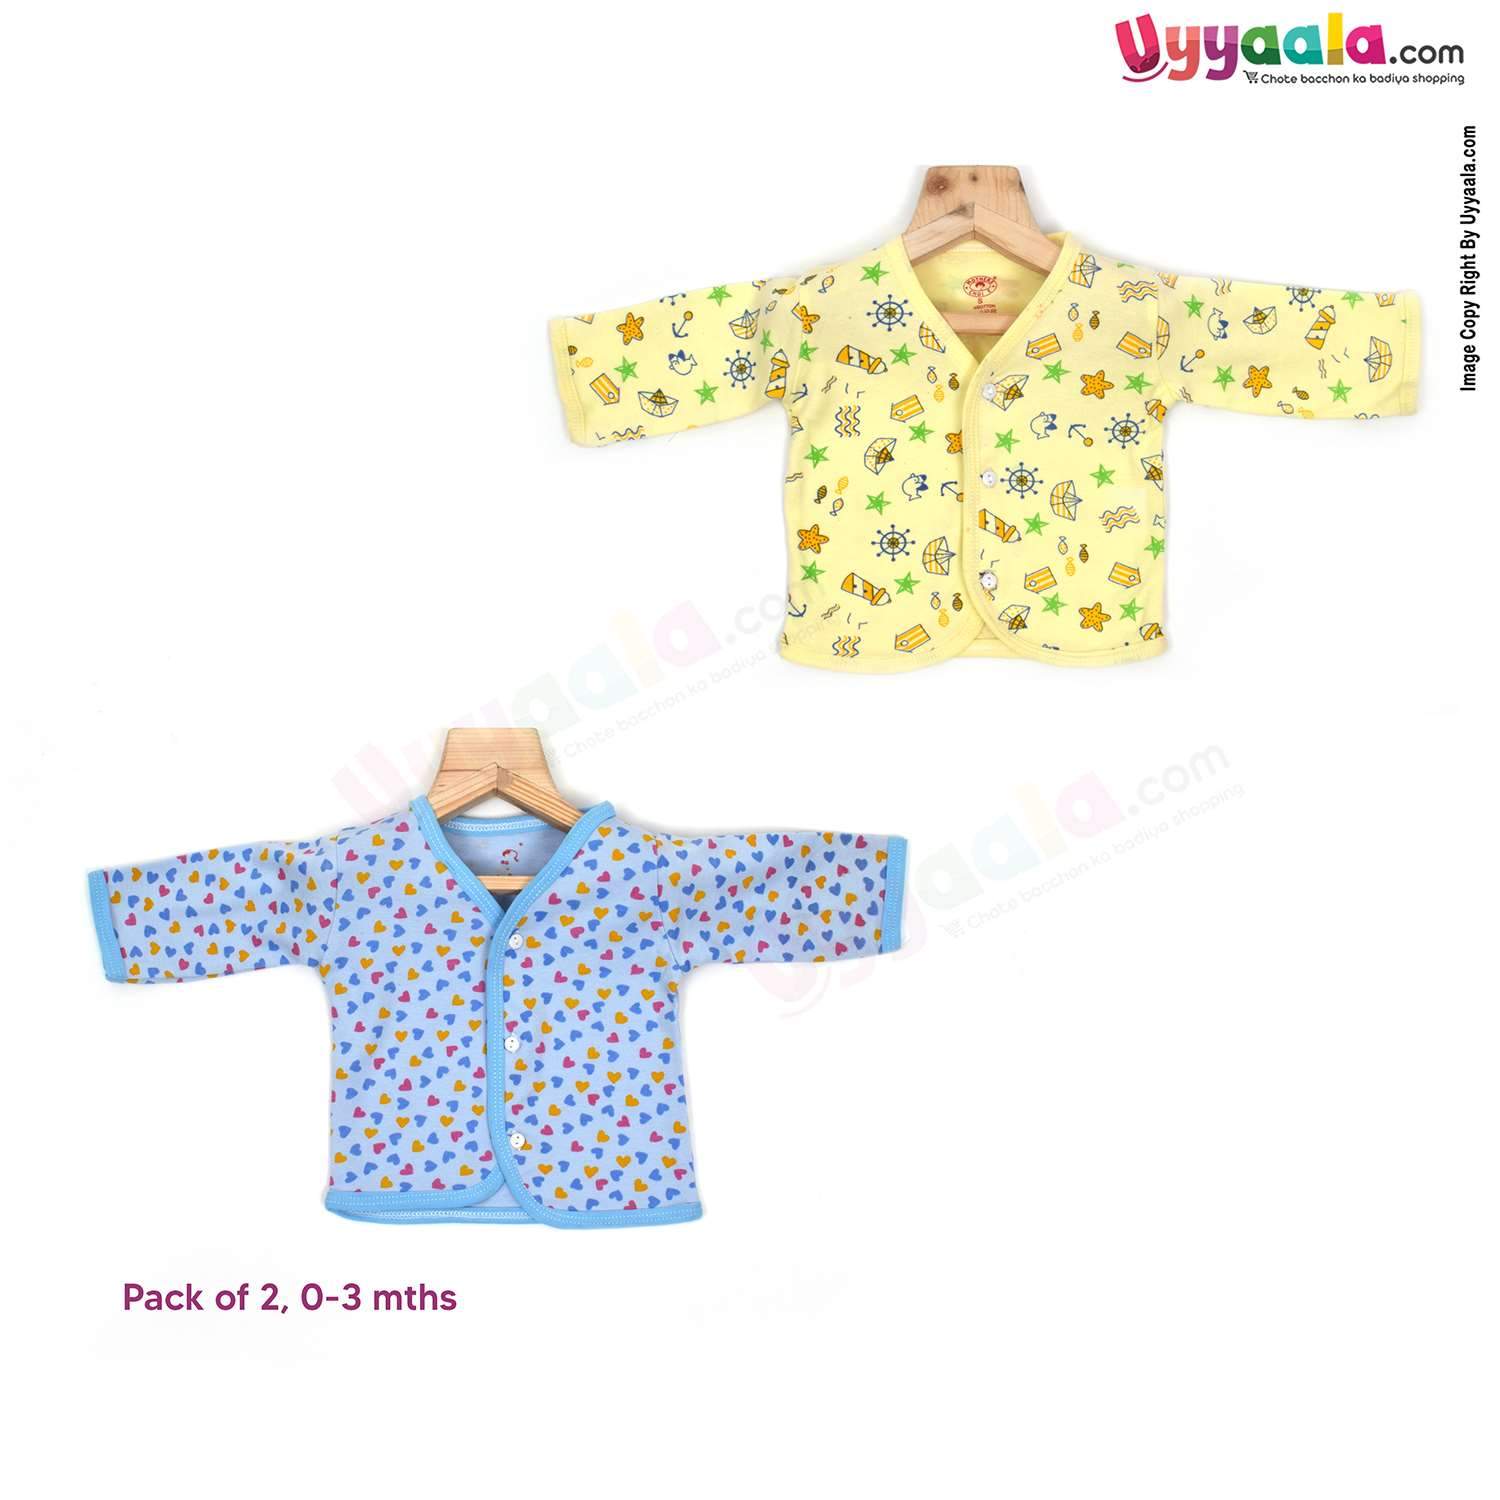 Mothers choice full sleeves front open jablas, 100% hosiery cotton, pack of 2 (0-3M) - yellow & blue with assorted print